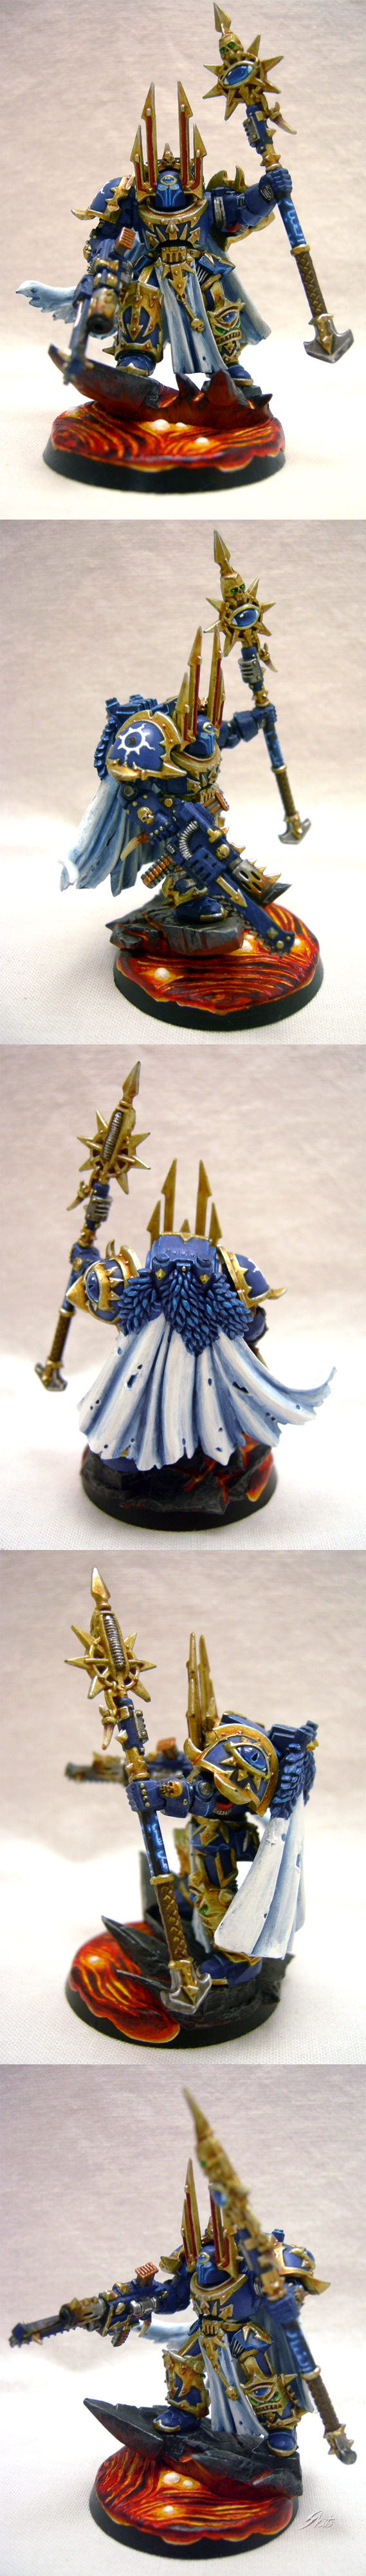 Lord, Sorcerer, Terminator Armor, Thousand Sons